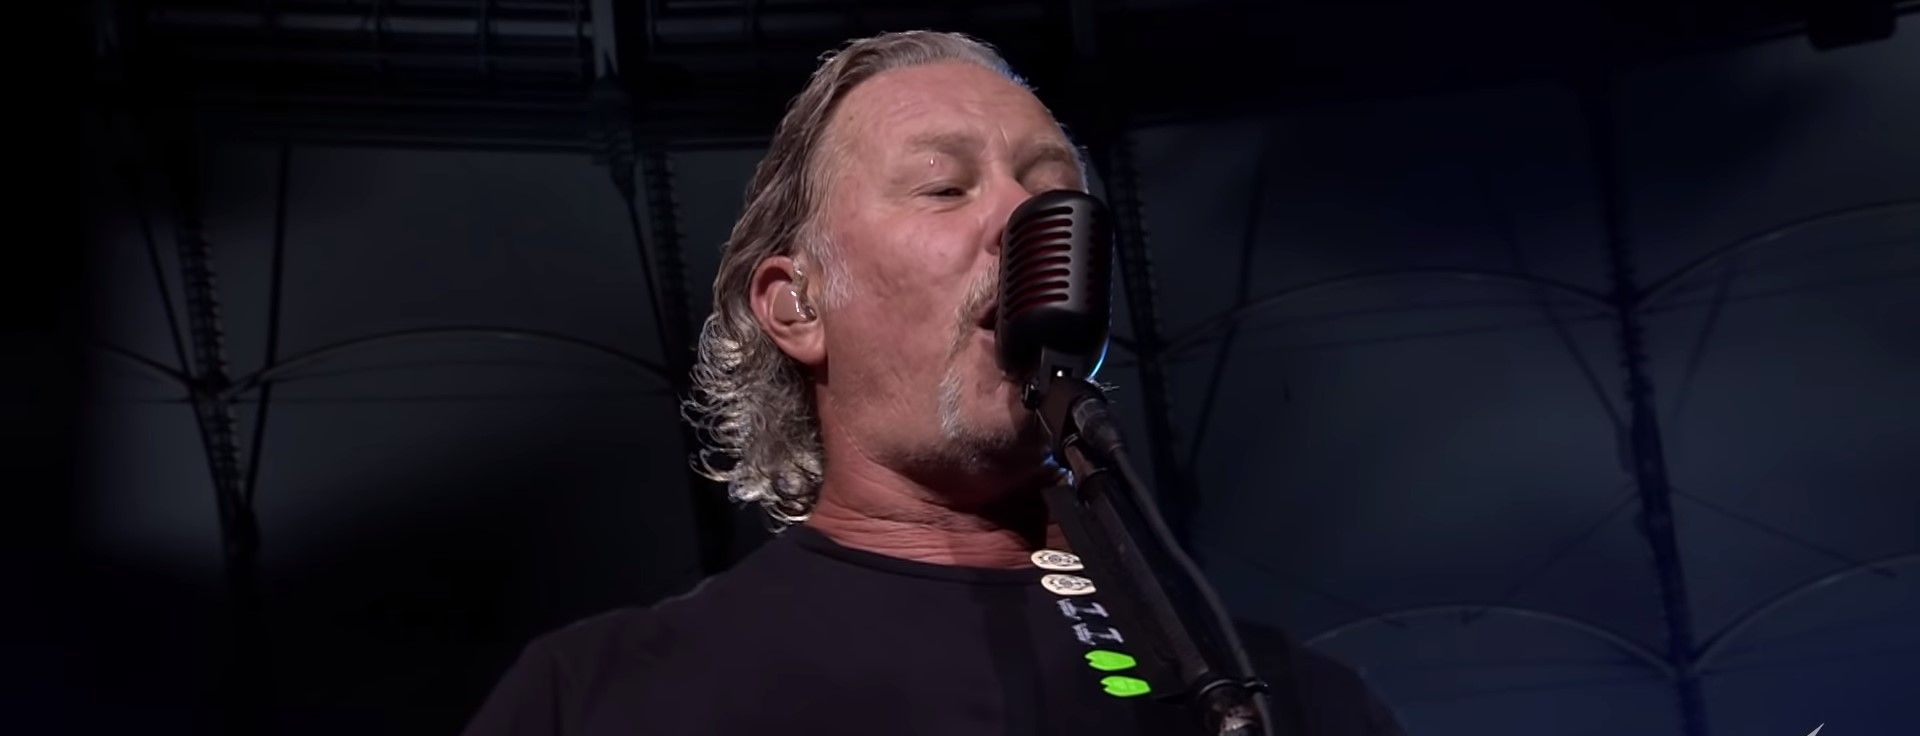 Metallica - For Whom The Bell Tolls (Live In Warsaw 2019)